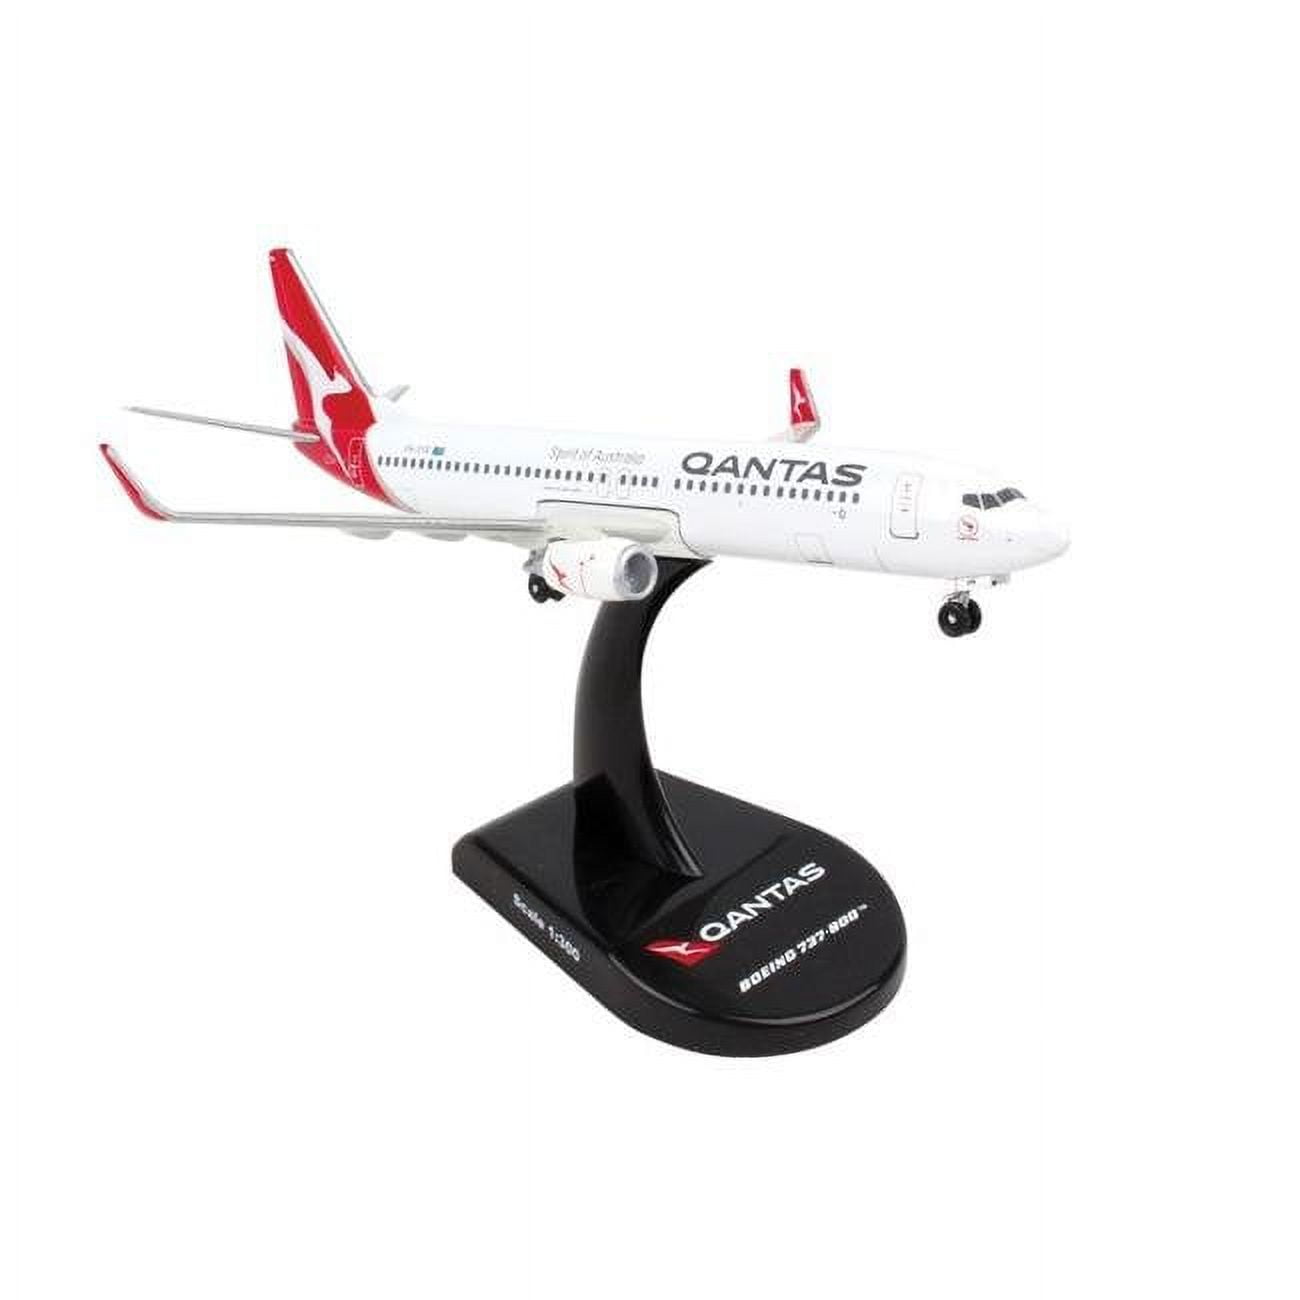 Ps5815-5 1 By 300 Scale Qantas 737-800 Model Airplane